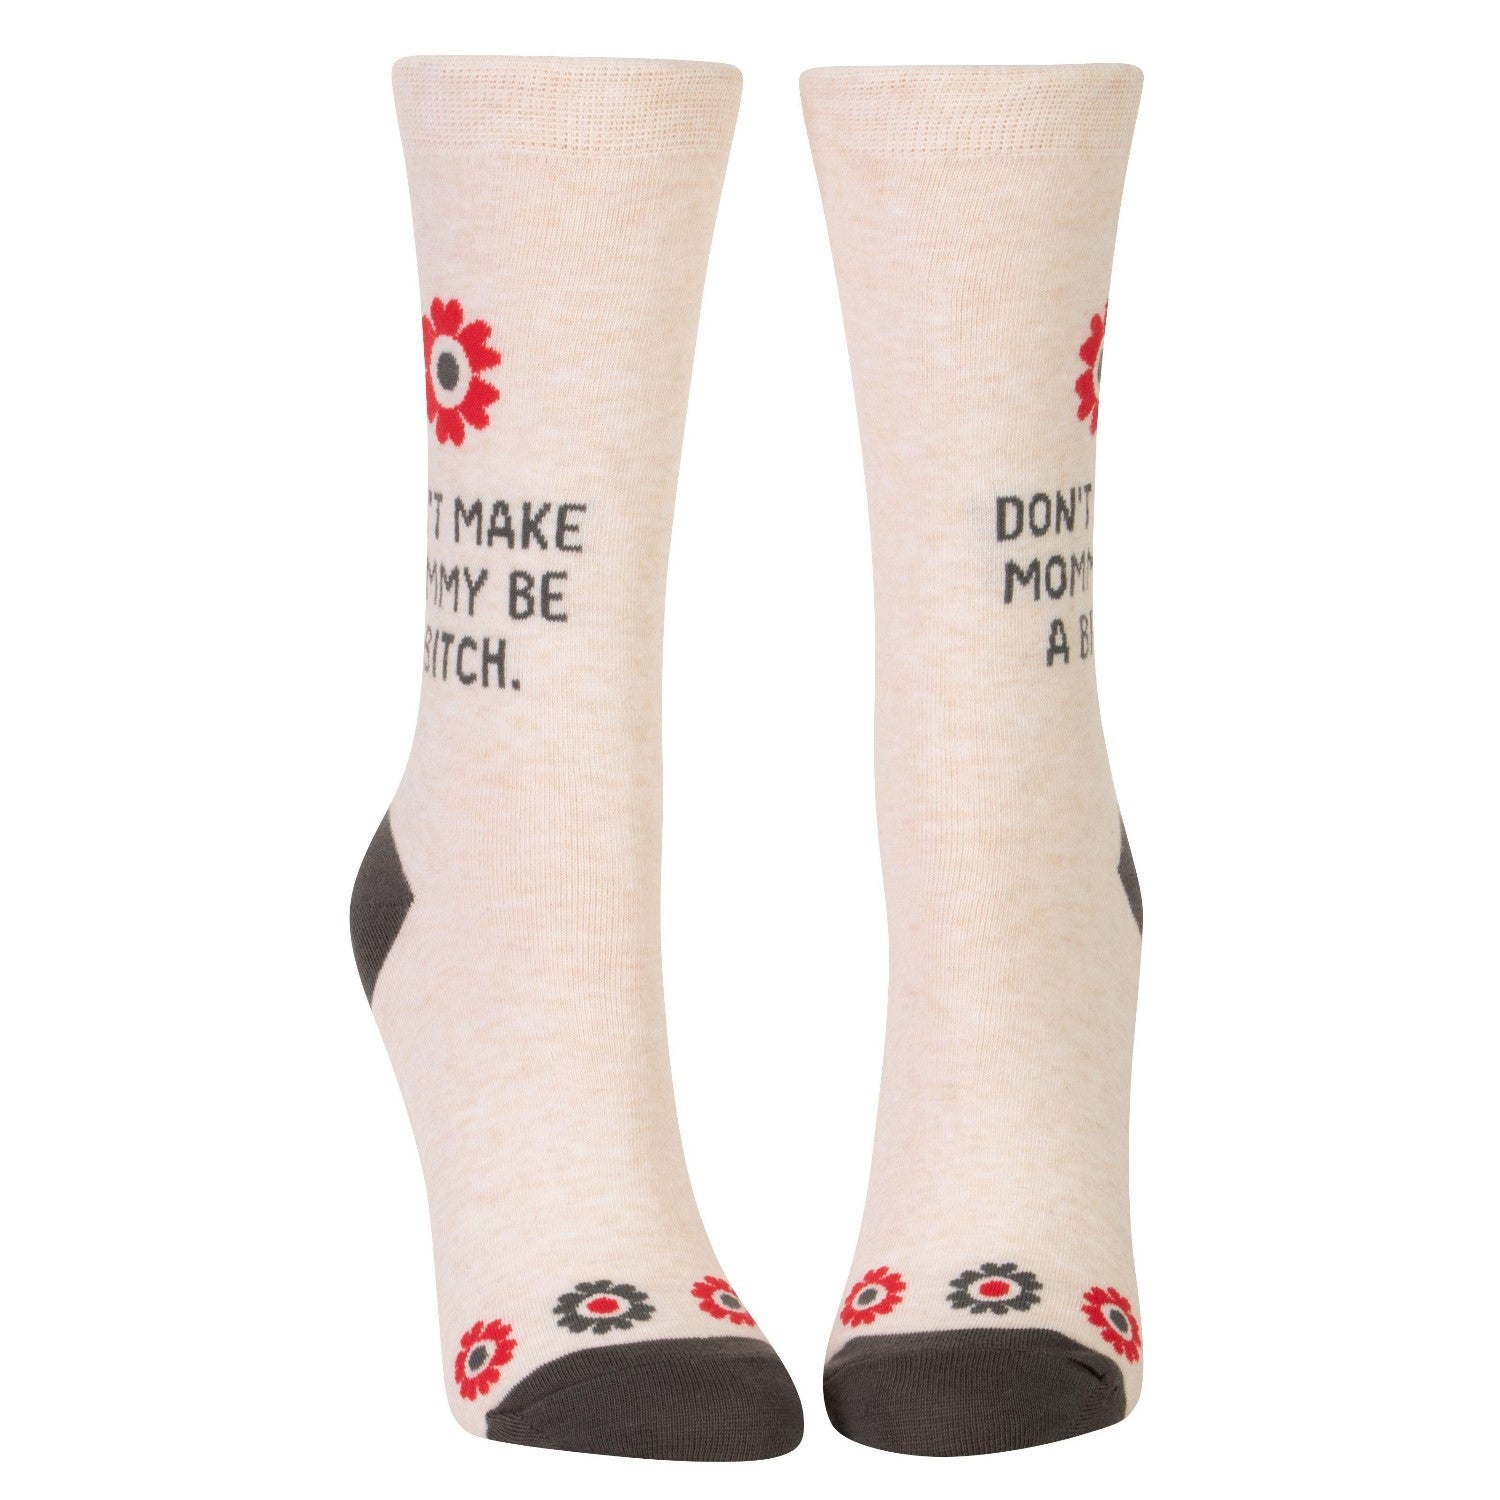 Picture of Women's Crew Socks - "Don't Make Mommy"